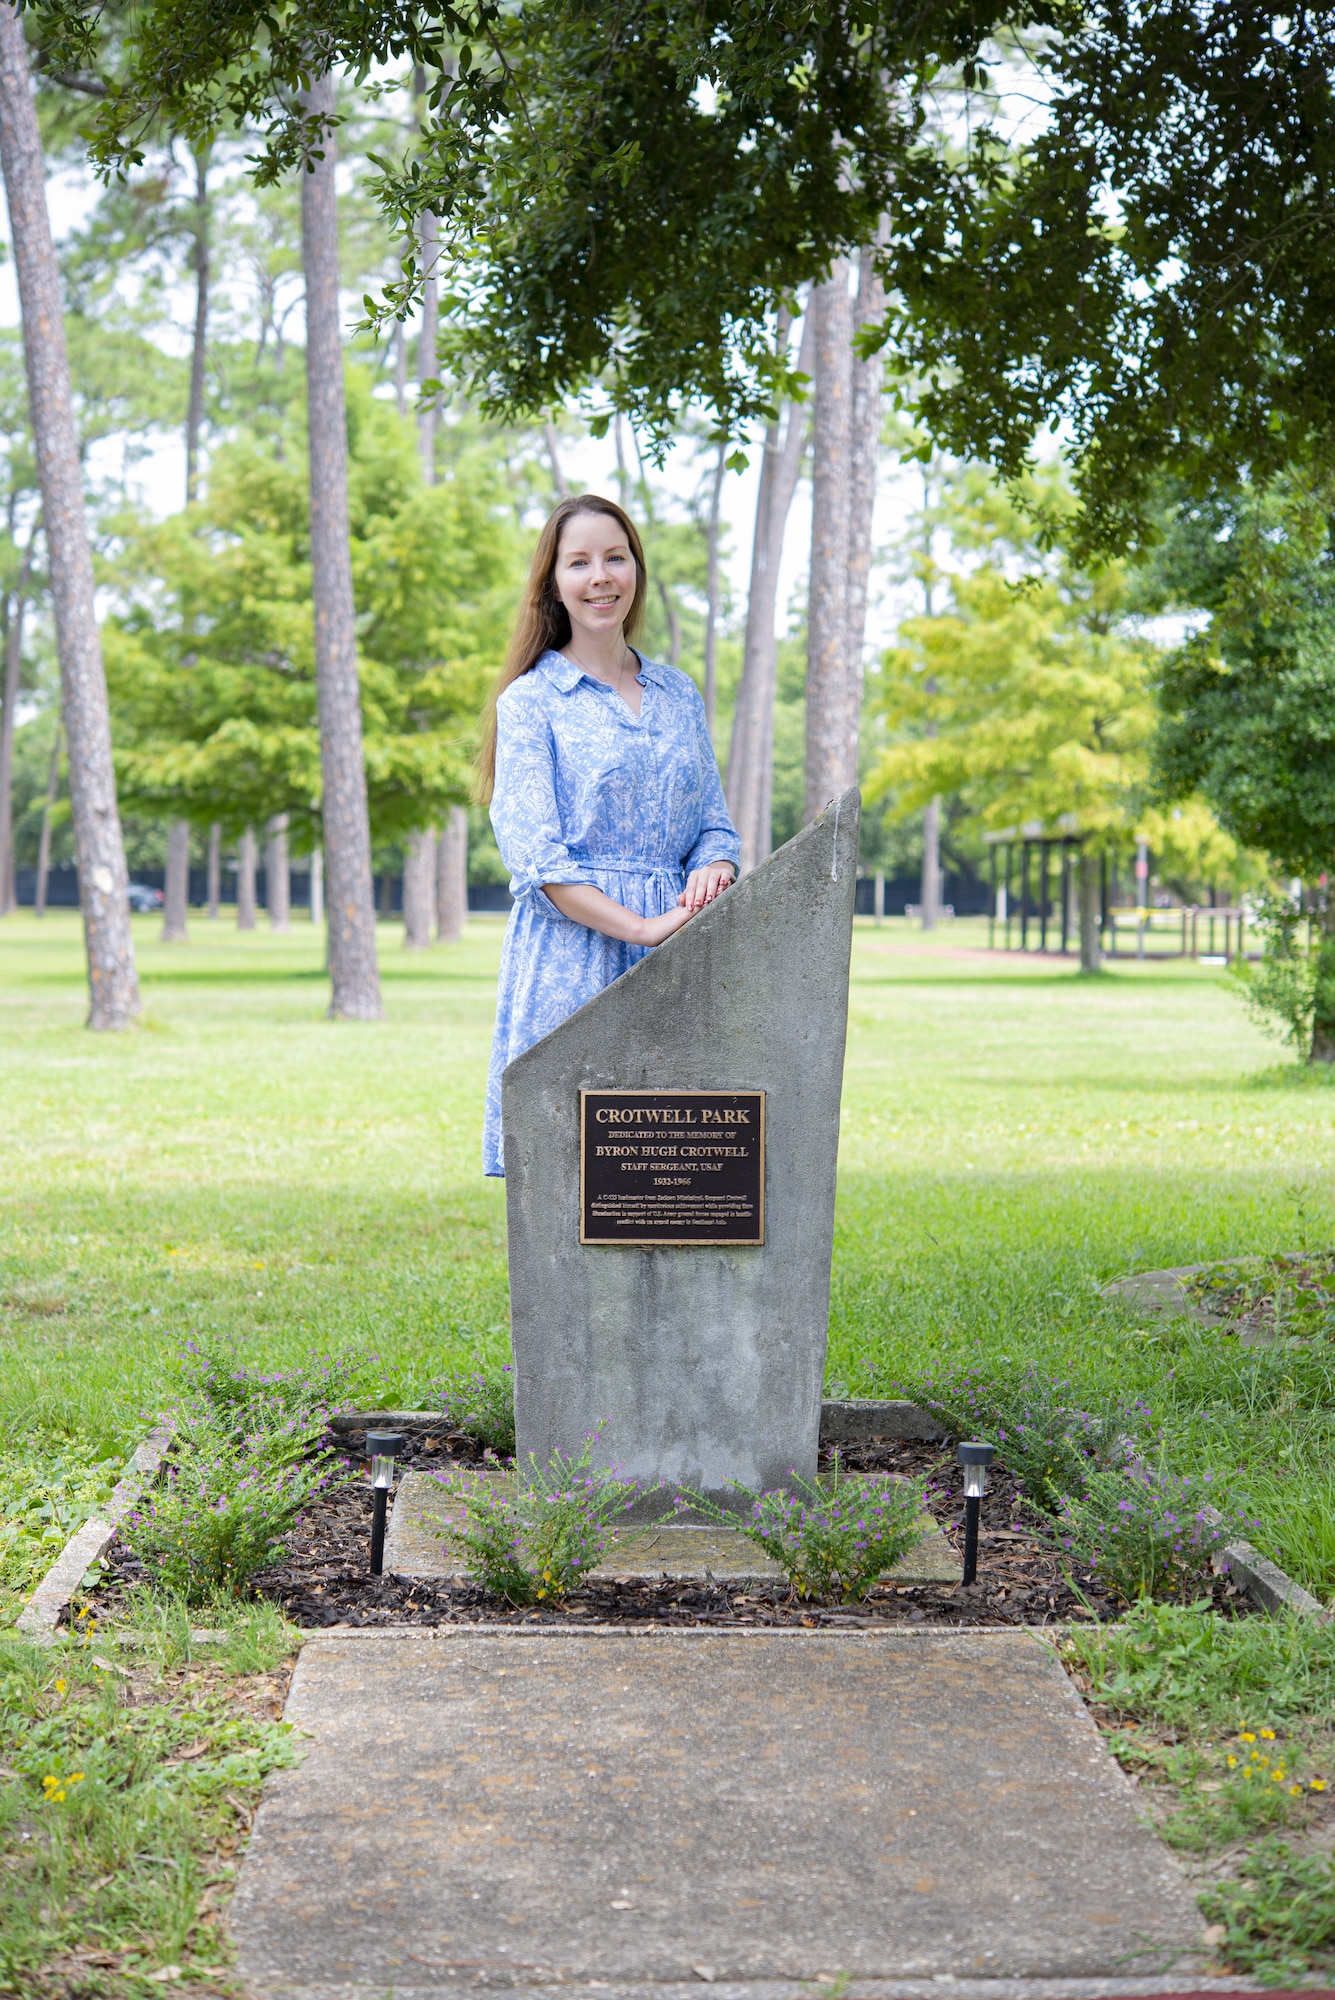 Casey Harper, 81st Training Support Squadron faculty development instructor, poses for a photo at the Crotwell Park at Keesler Air Force Base, Mississippi, Aug. 6, 2021. Harper took initiative to repair Staff Sgt. Byron Crotwell's Memorial. (U.S. Air Force photo by Senior Airman Kimberly Mueller)